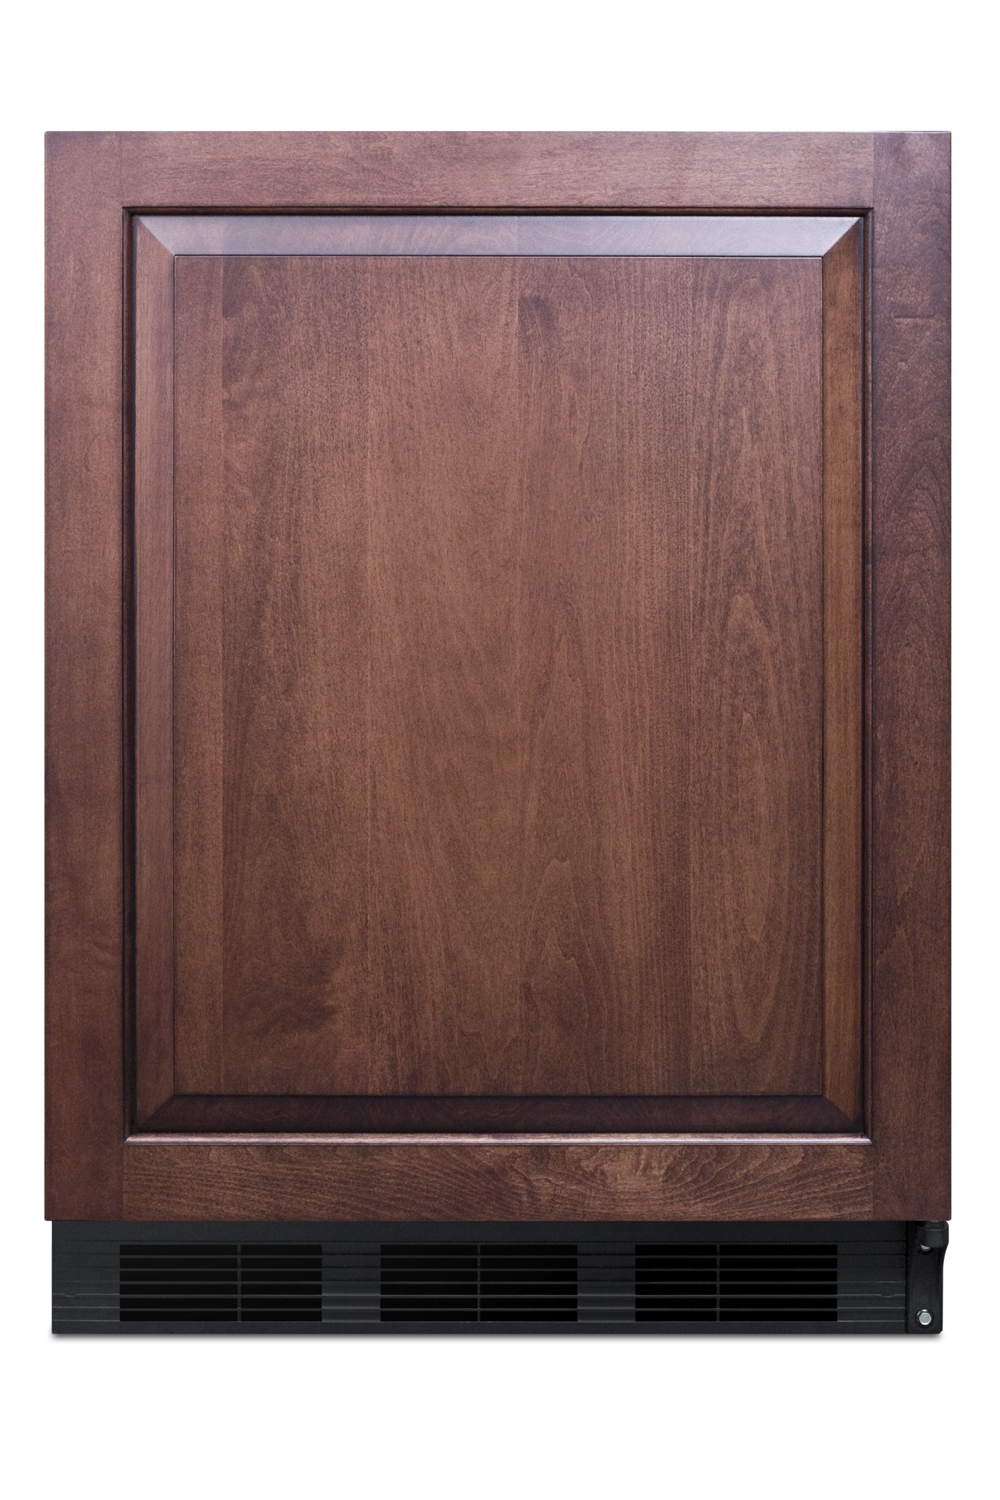 Summit 24" Wide Built-In All-Refrigerator (Panel Not Included)